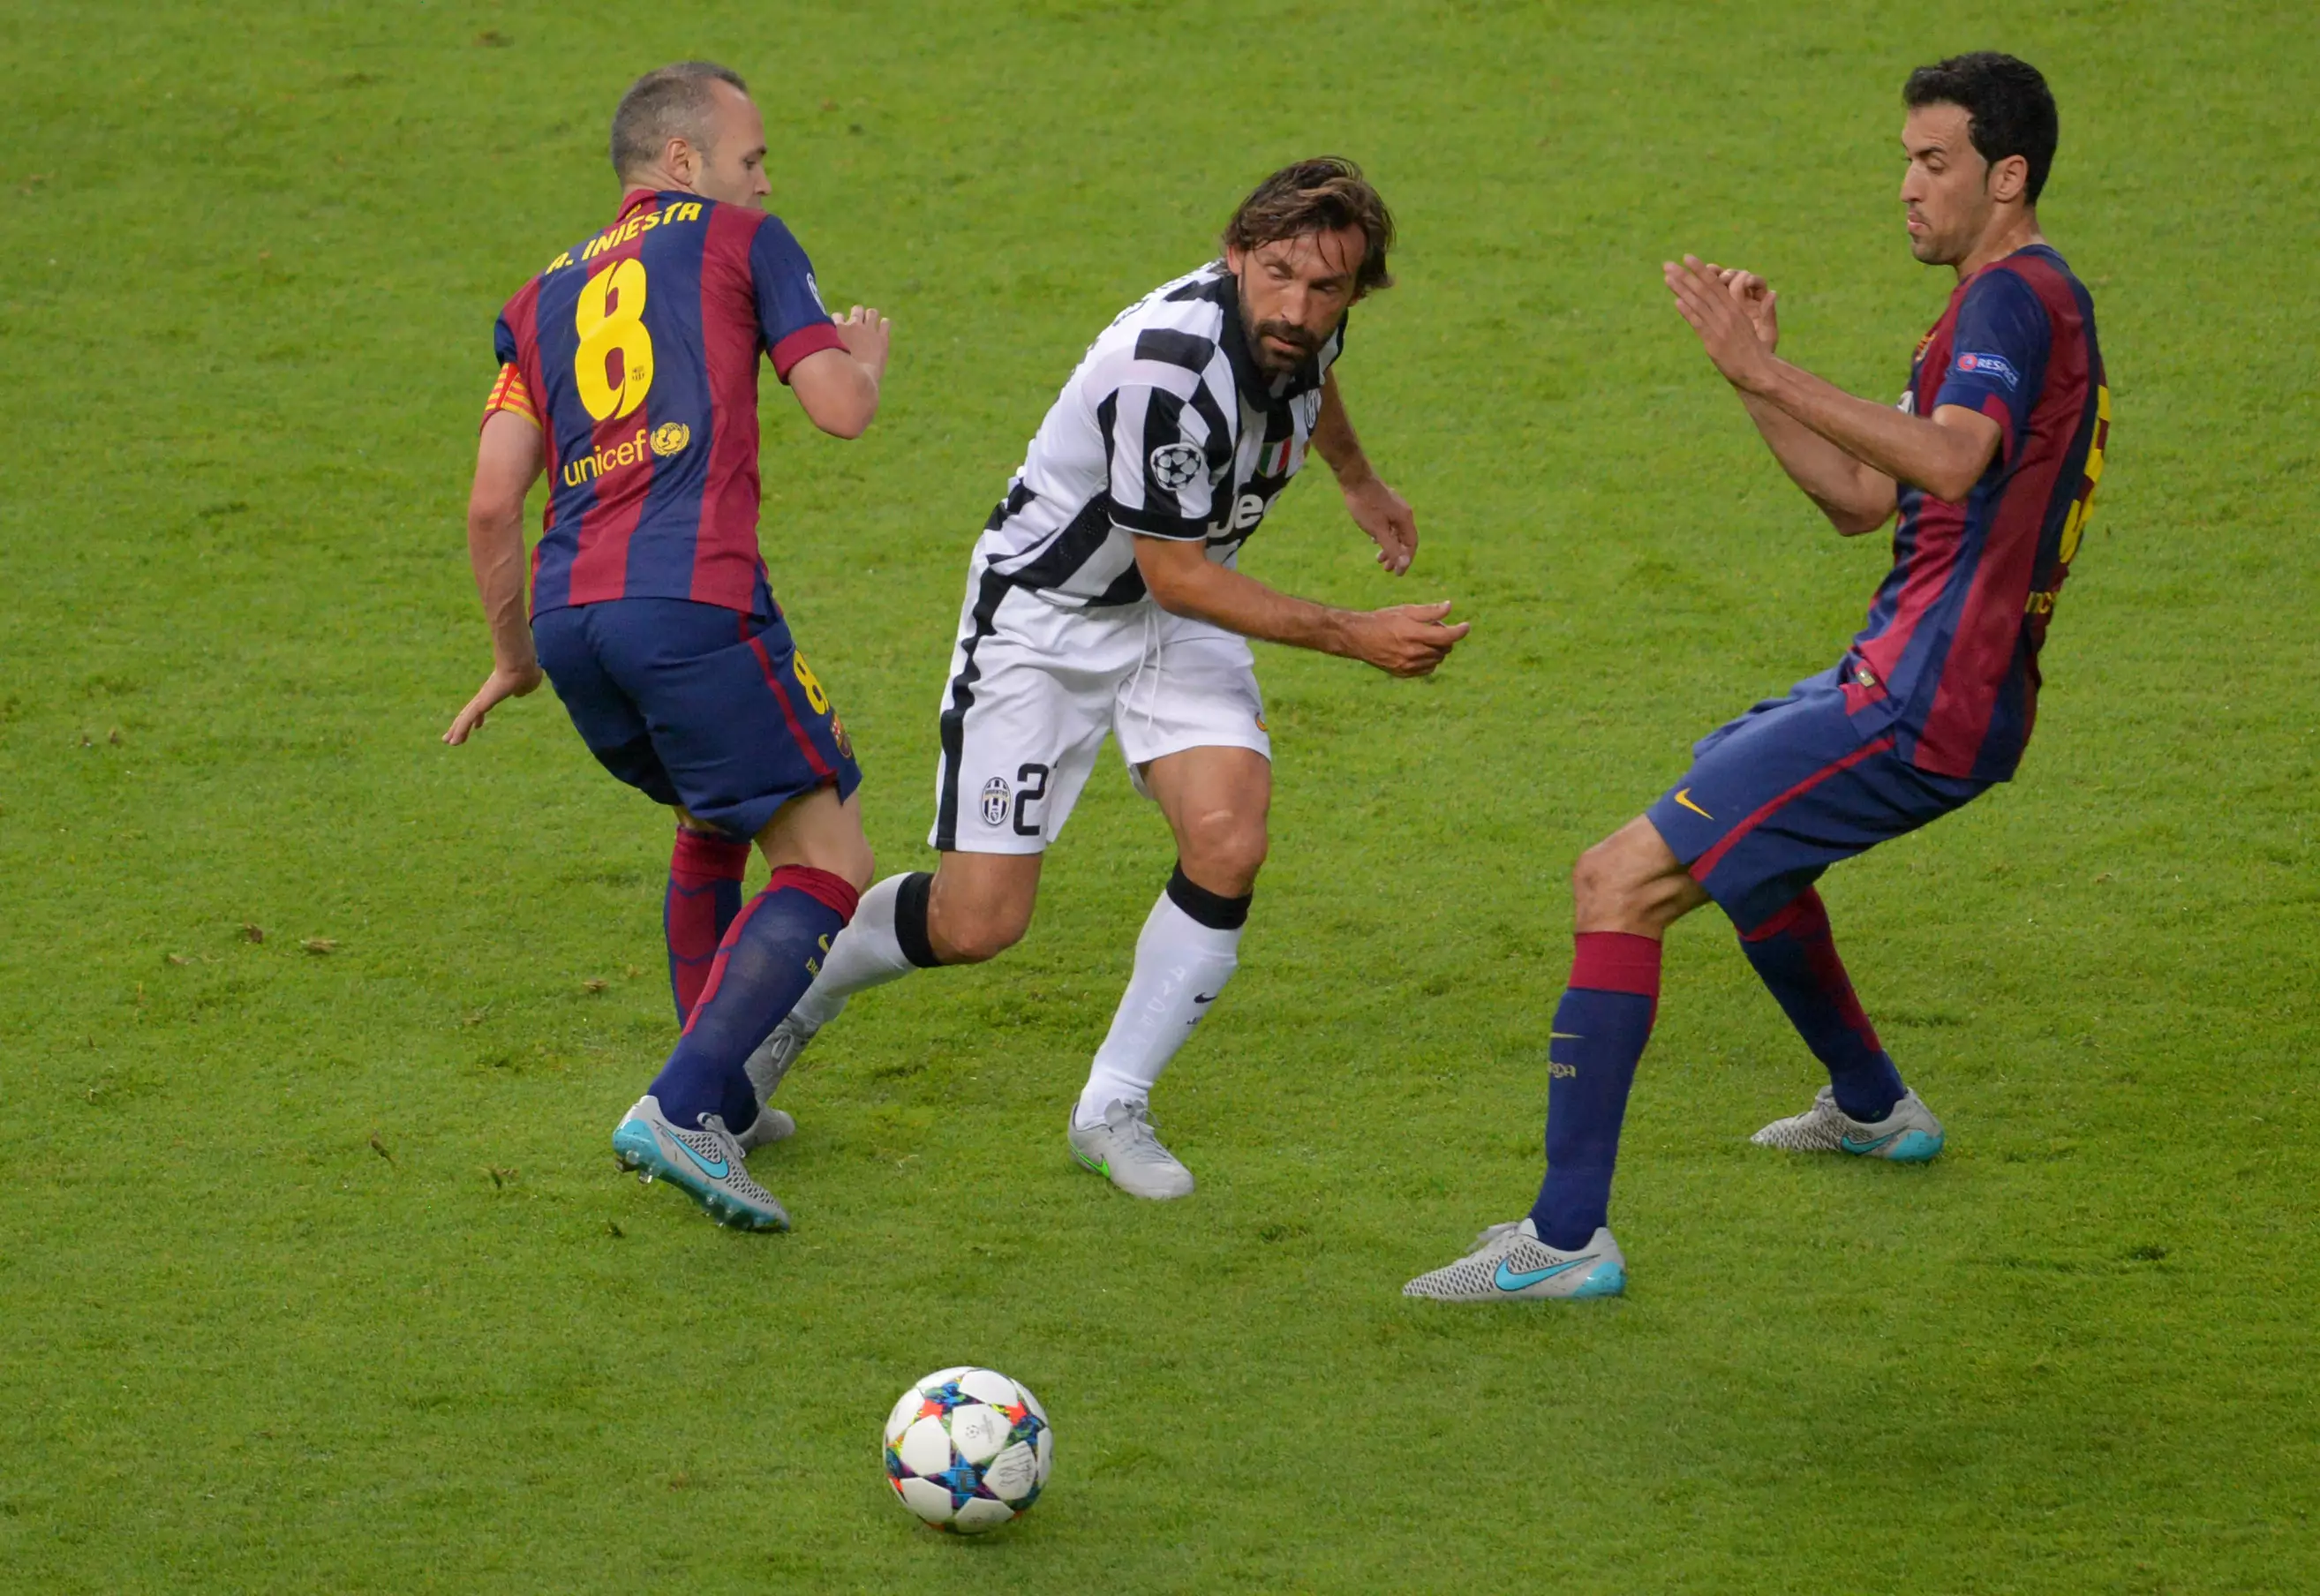 Pirlo playing in the 2015 Champions League final. Image: PA Images